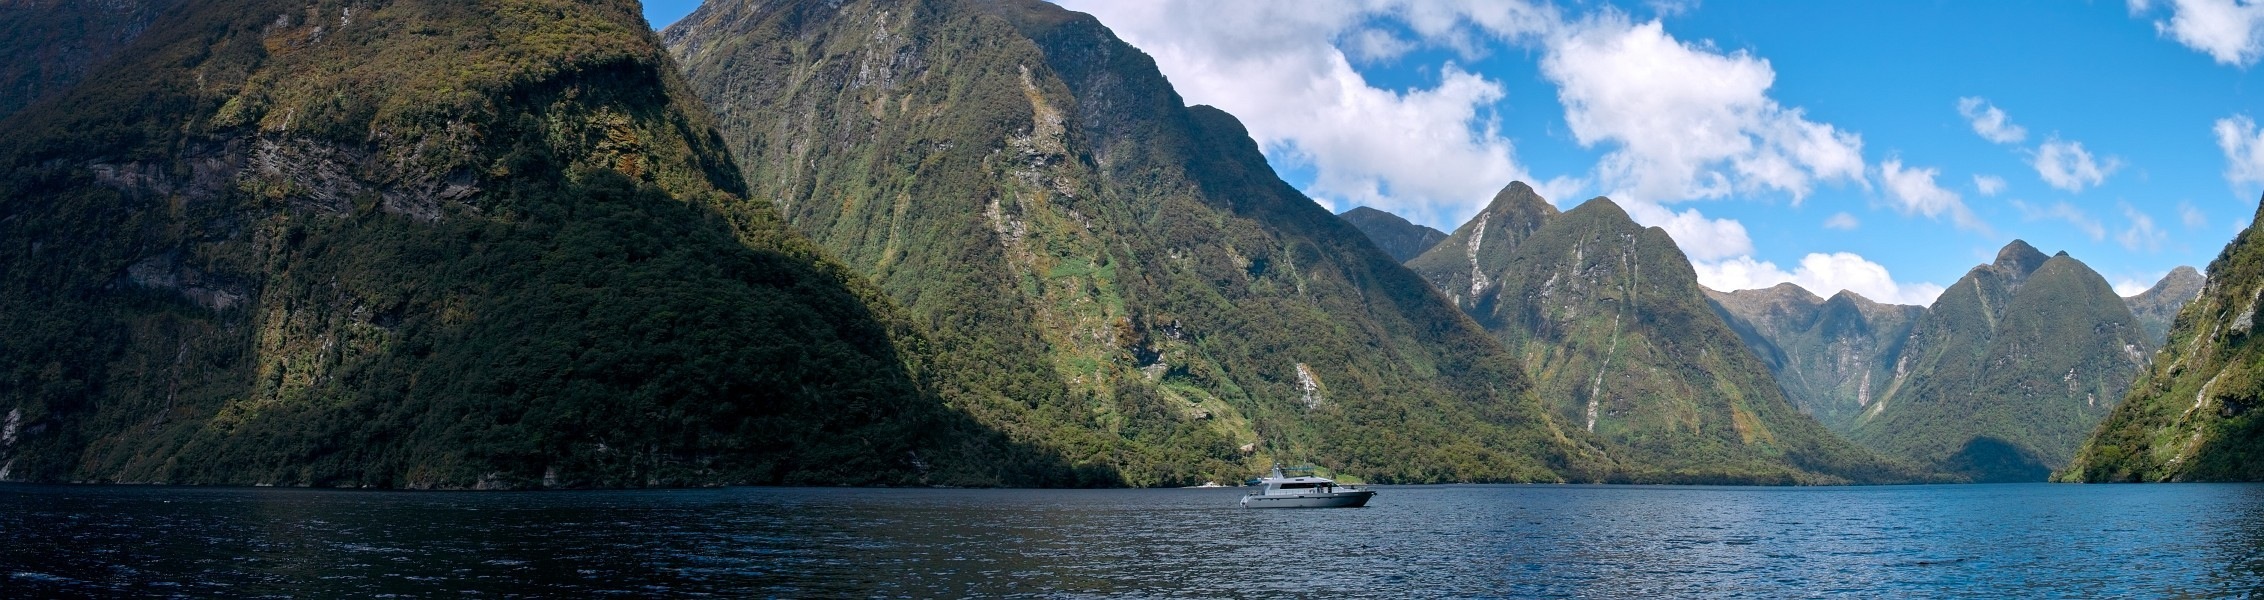 Inlet at Doubtful Sound